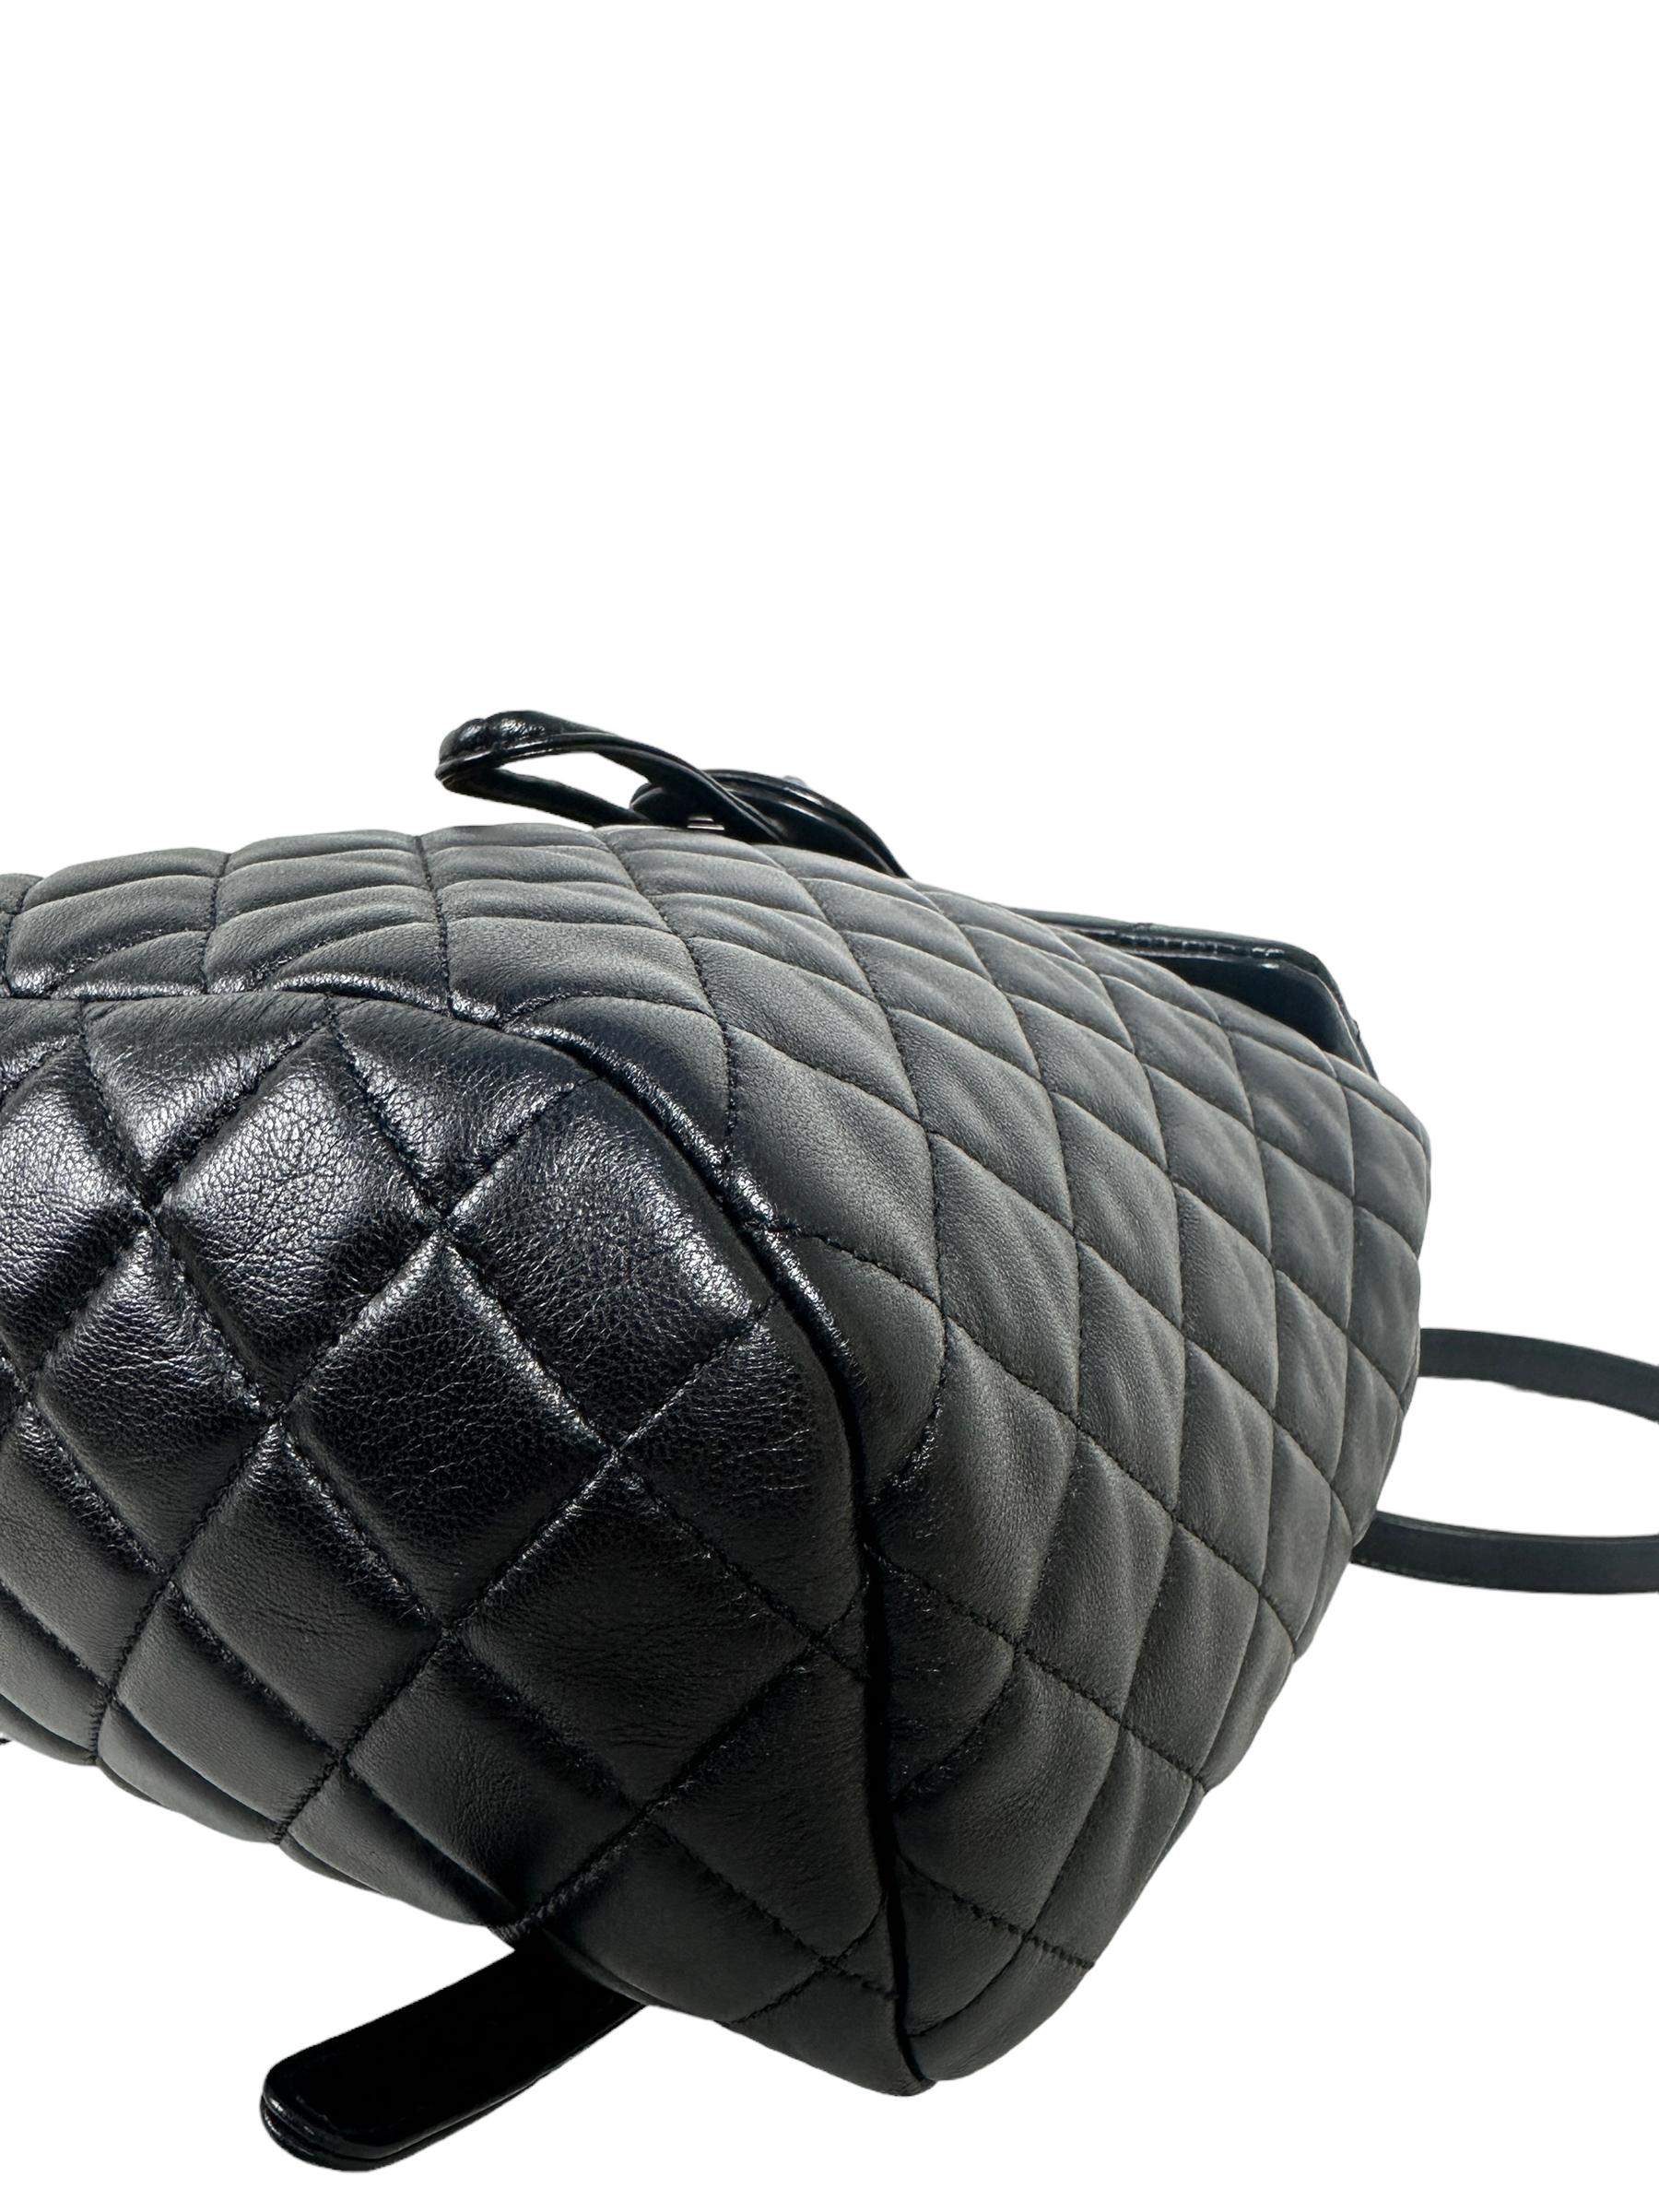 Chanel Black Lambskin Quilted Small Urban Spirit Backpack Bag 2